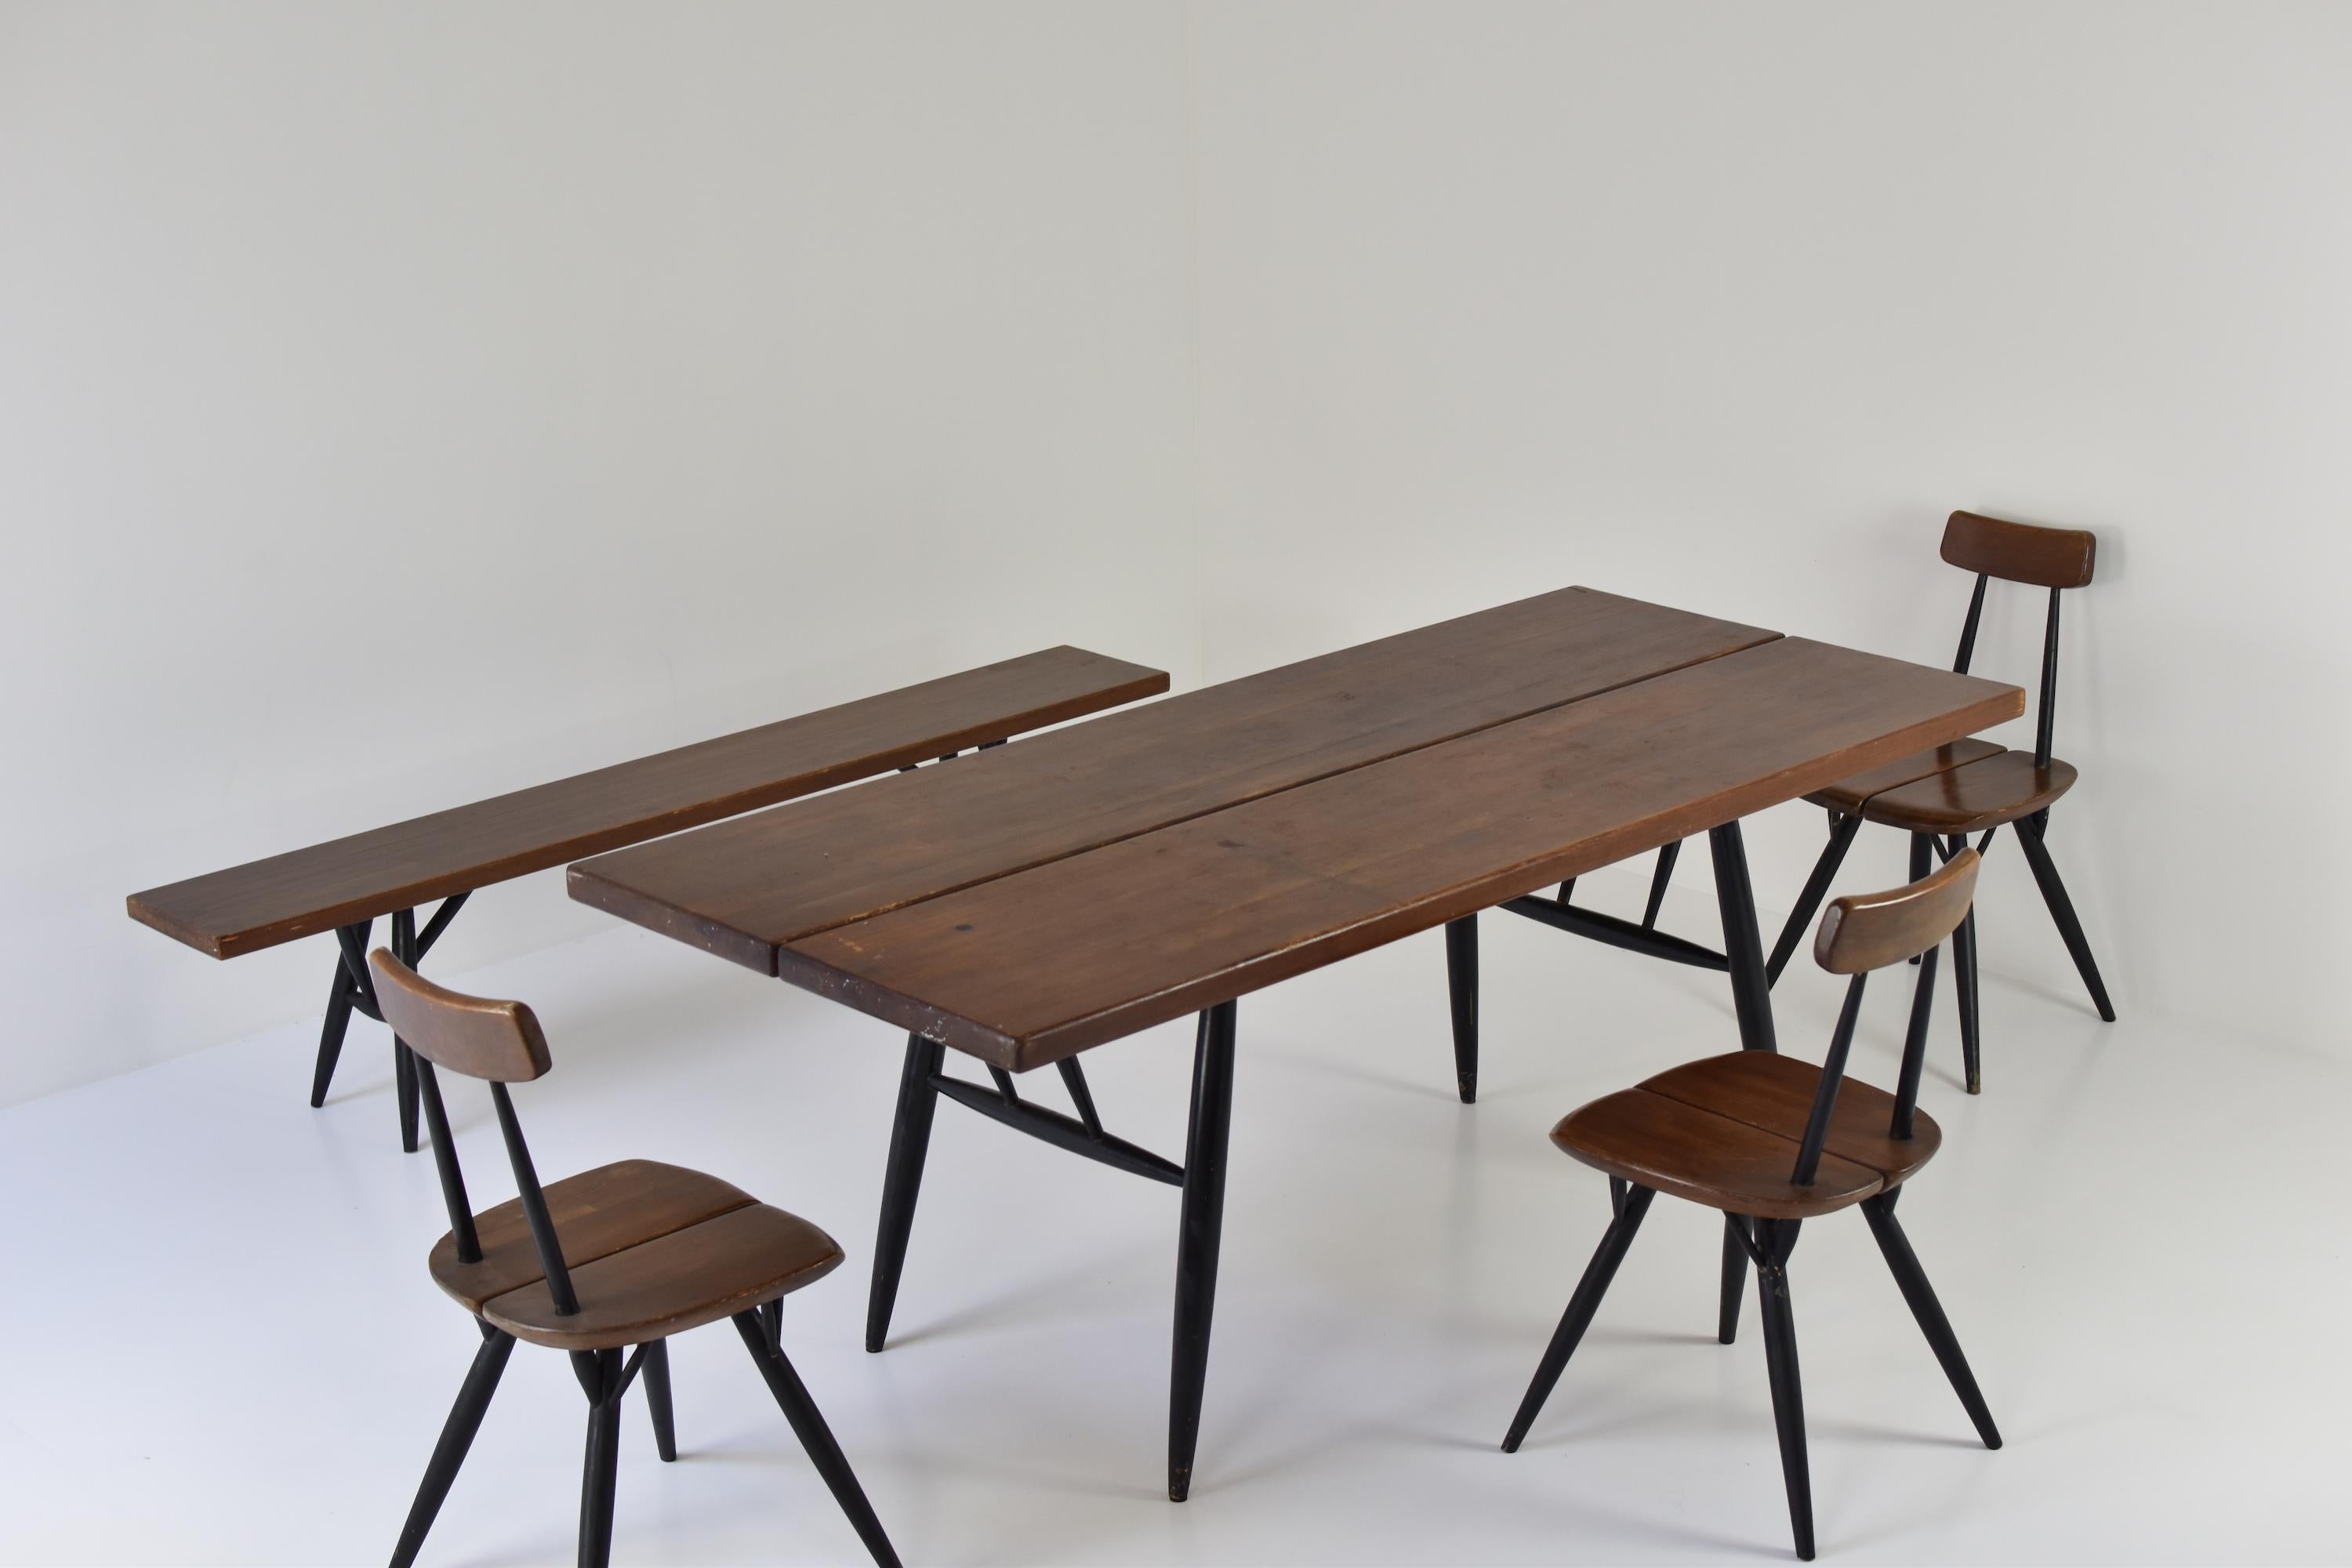 Pirkka dining set by Ilmari Tapiovaara for Laukaan Puu, Finland, 1955. This set features a table, bench and three chairs, all in dark pine and black stained pine wood. Visible signs of age and use. Highly collectible. Labeled.

Dimensions:
Table: H